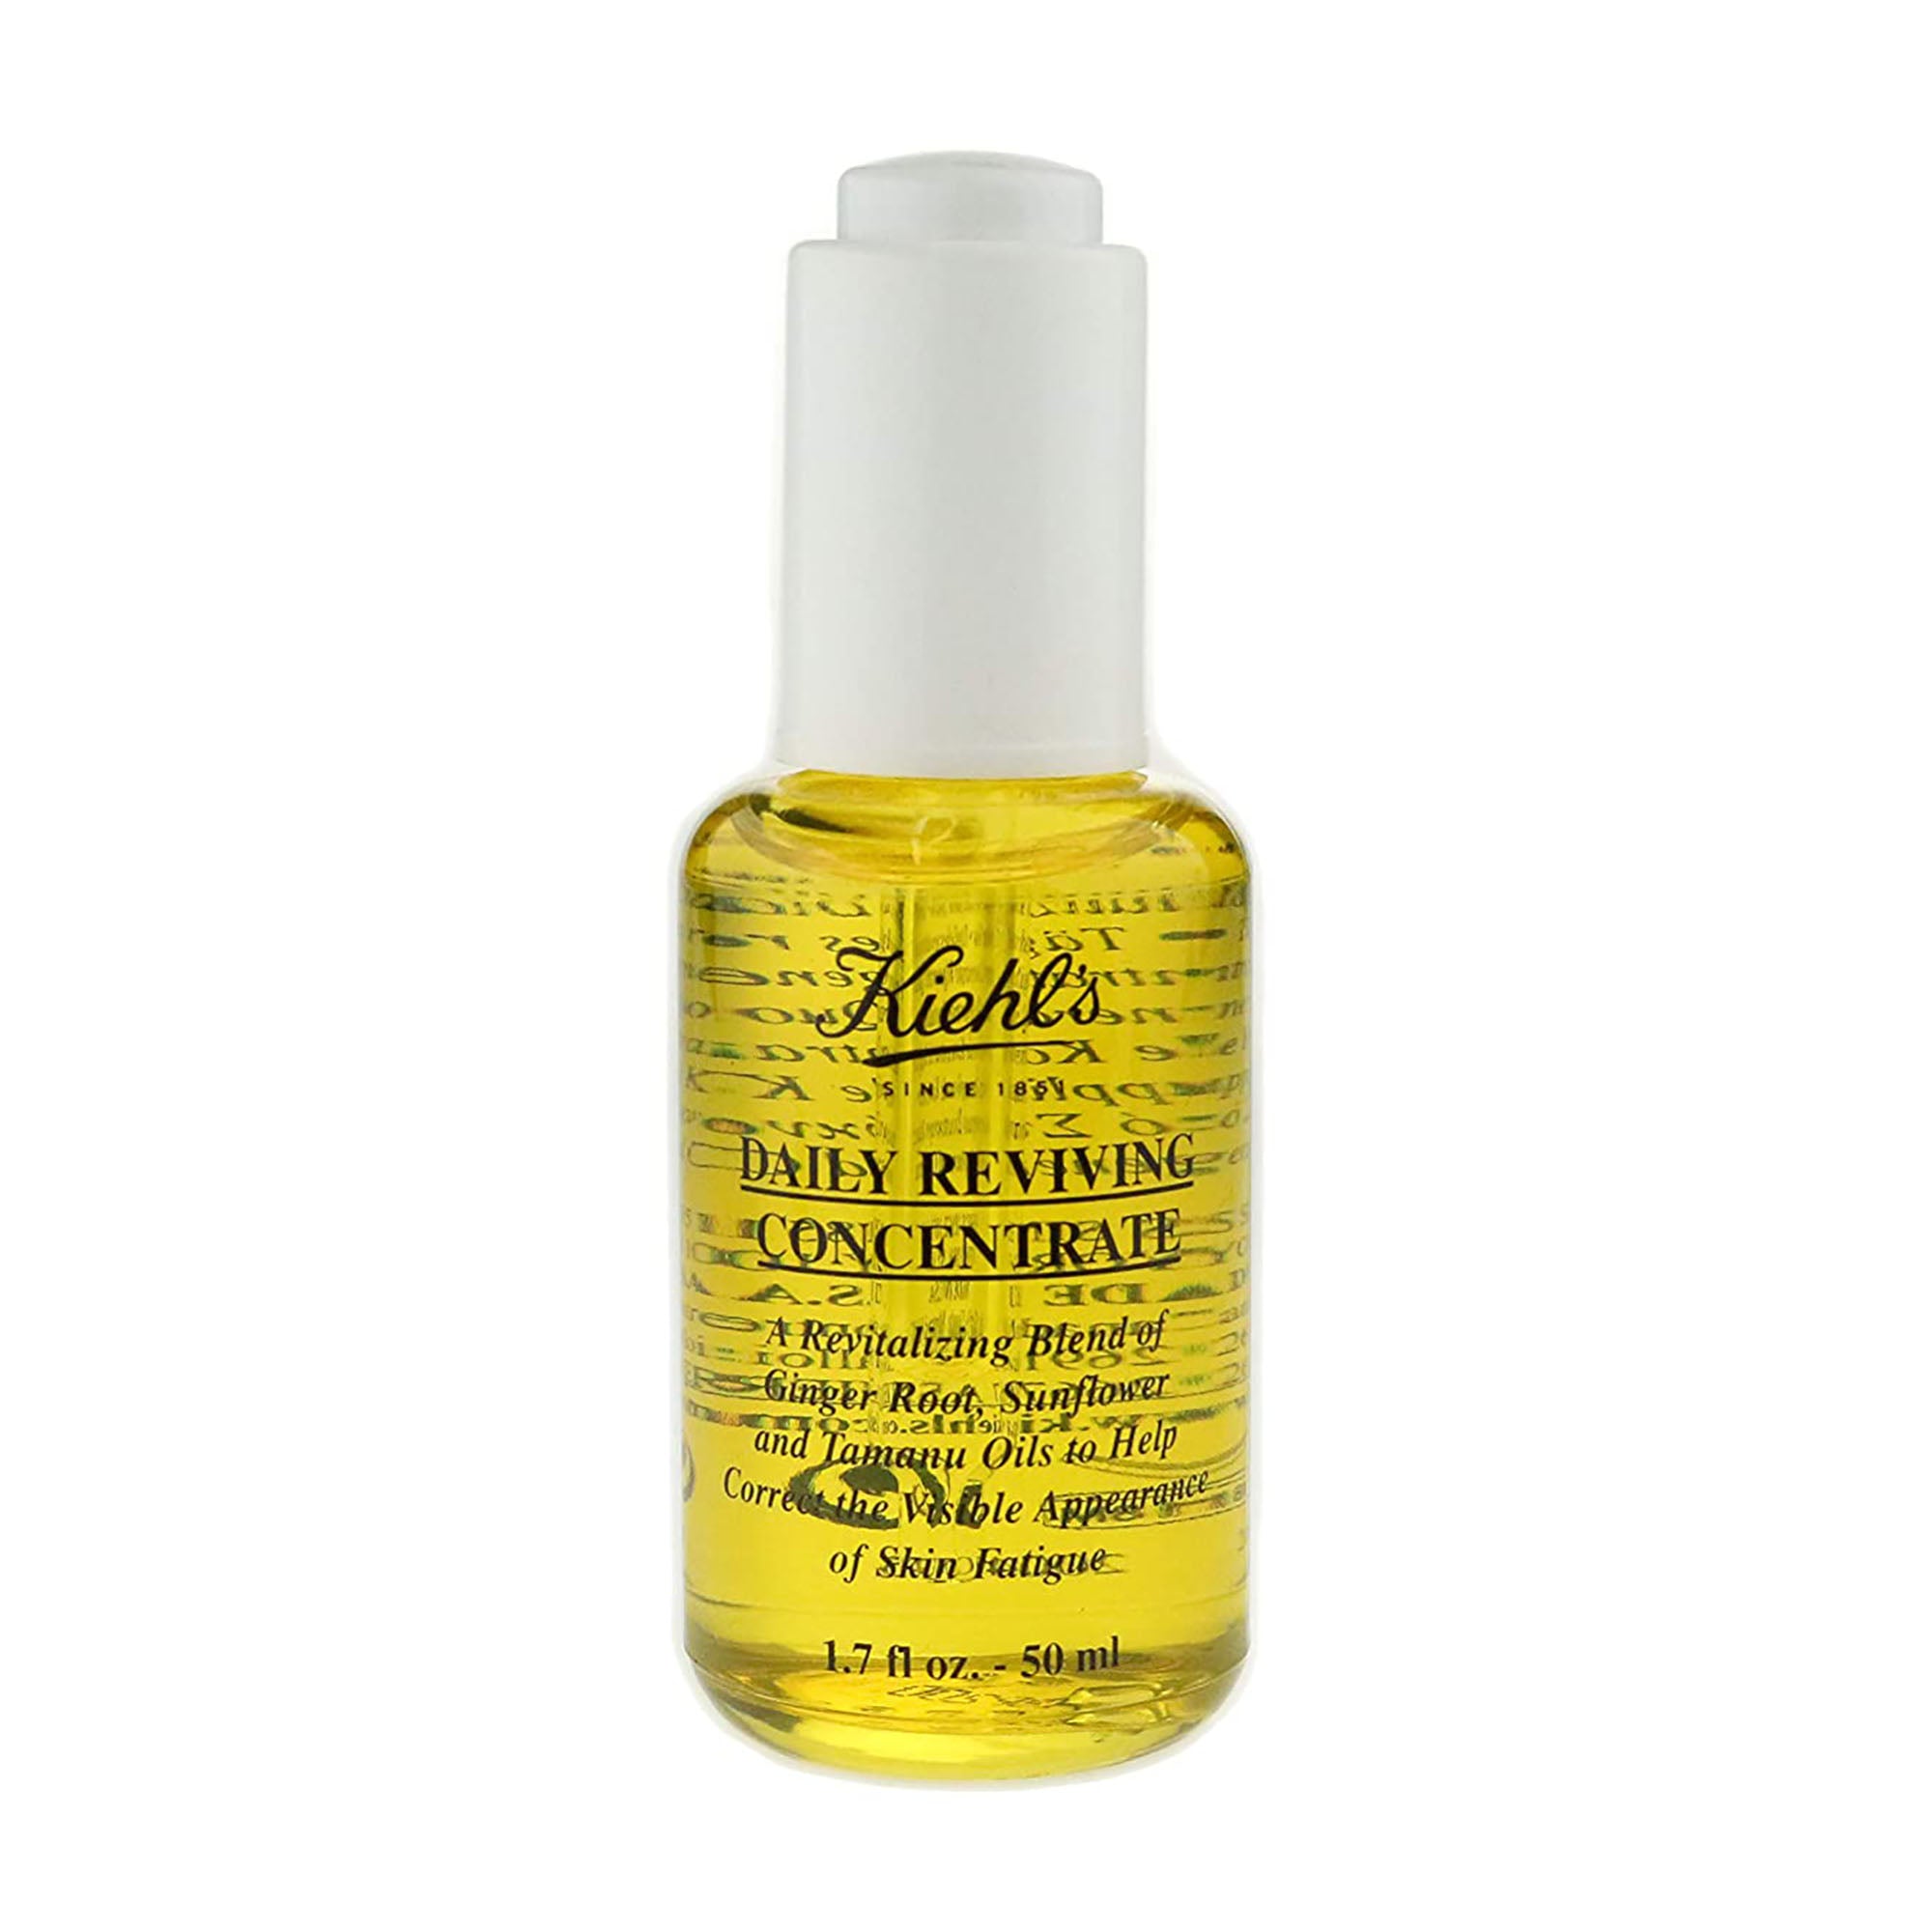 Kiehl's Daily Reviving Concentrate Face Oil - 1.7oz / 1.7OZ